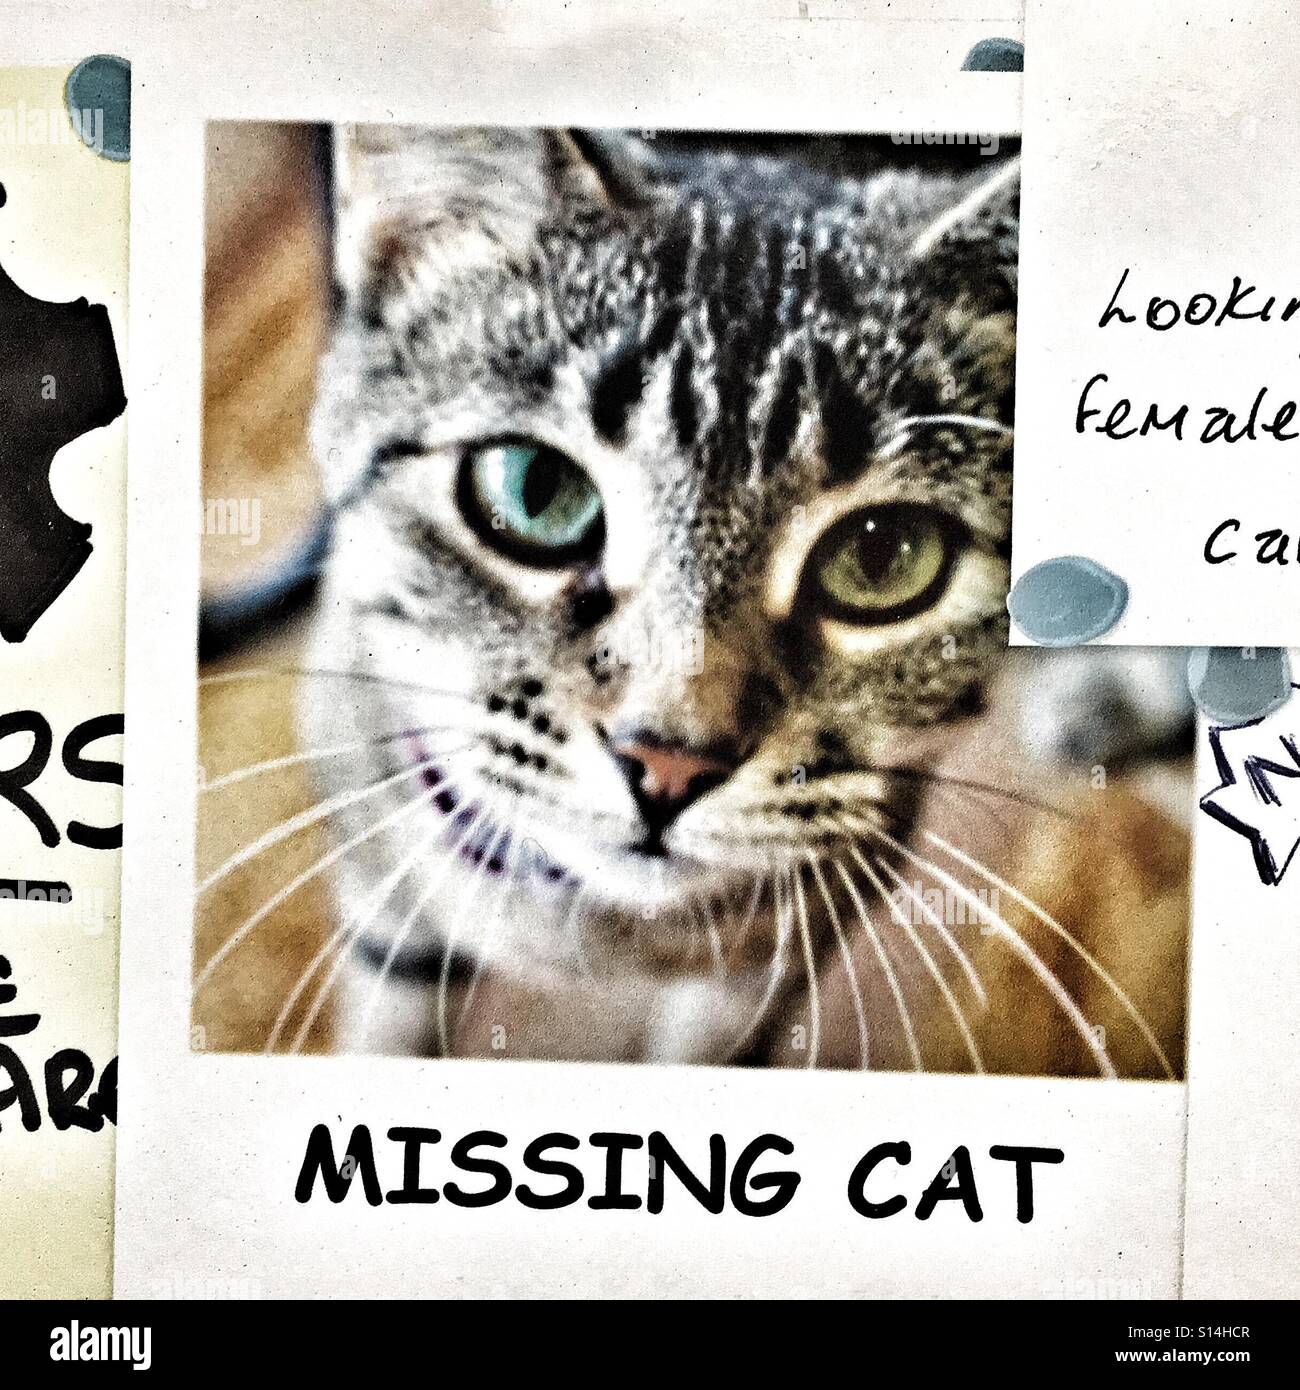 missing-cat-poster-in-shop-window-stock-photo-alamy